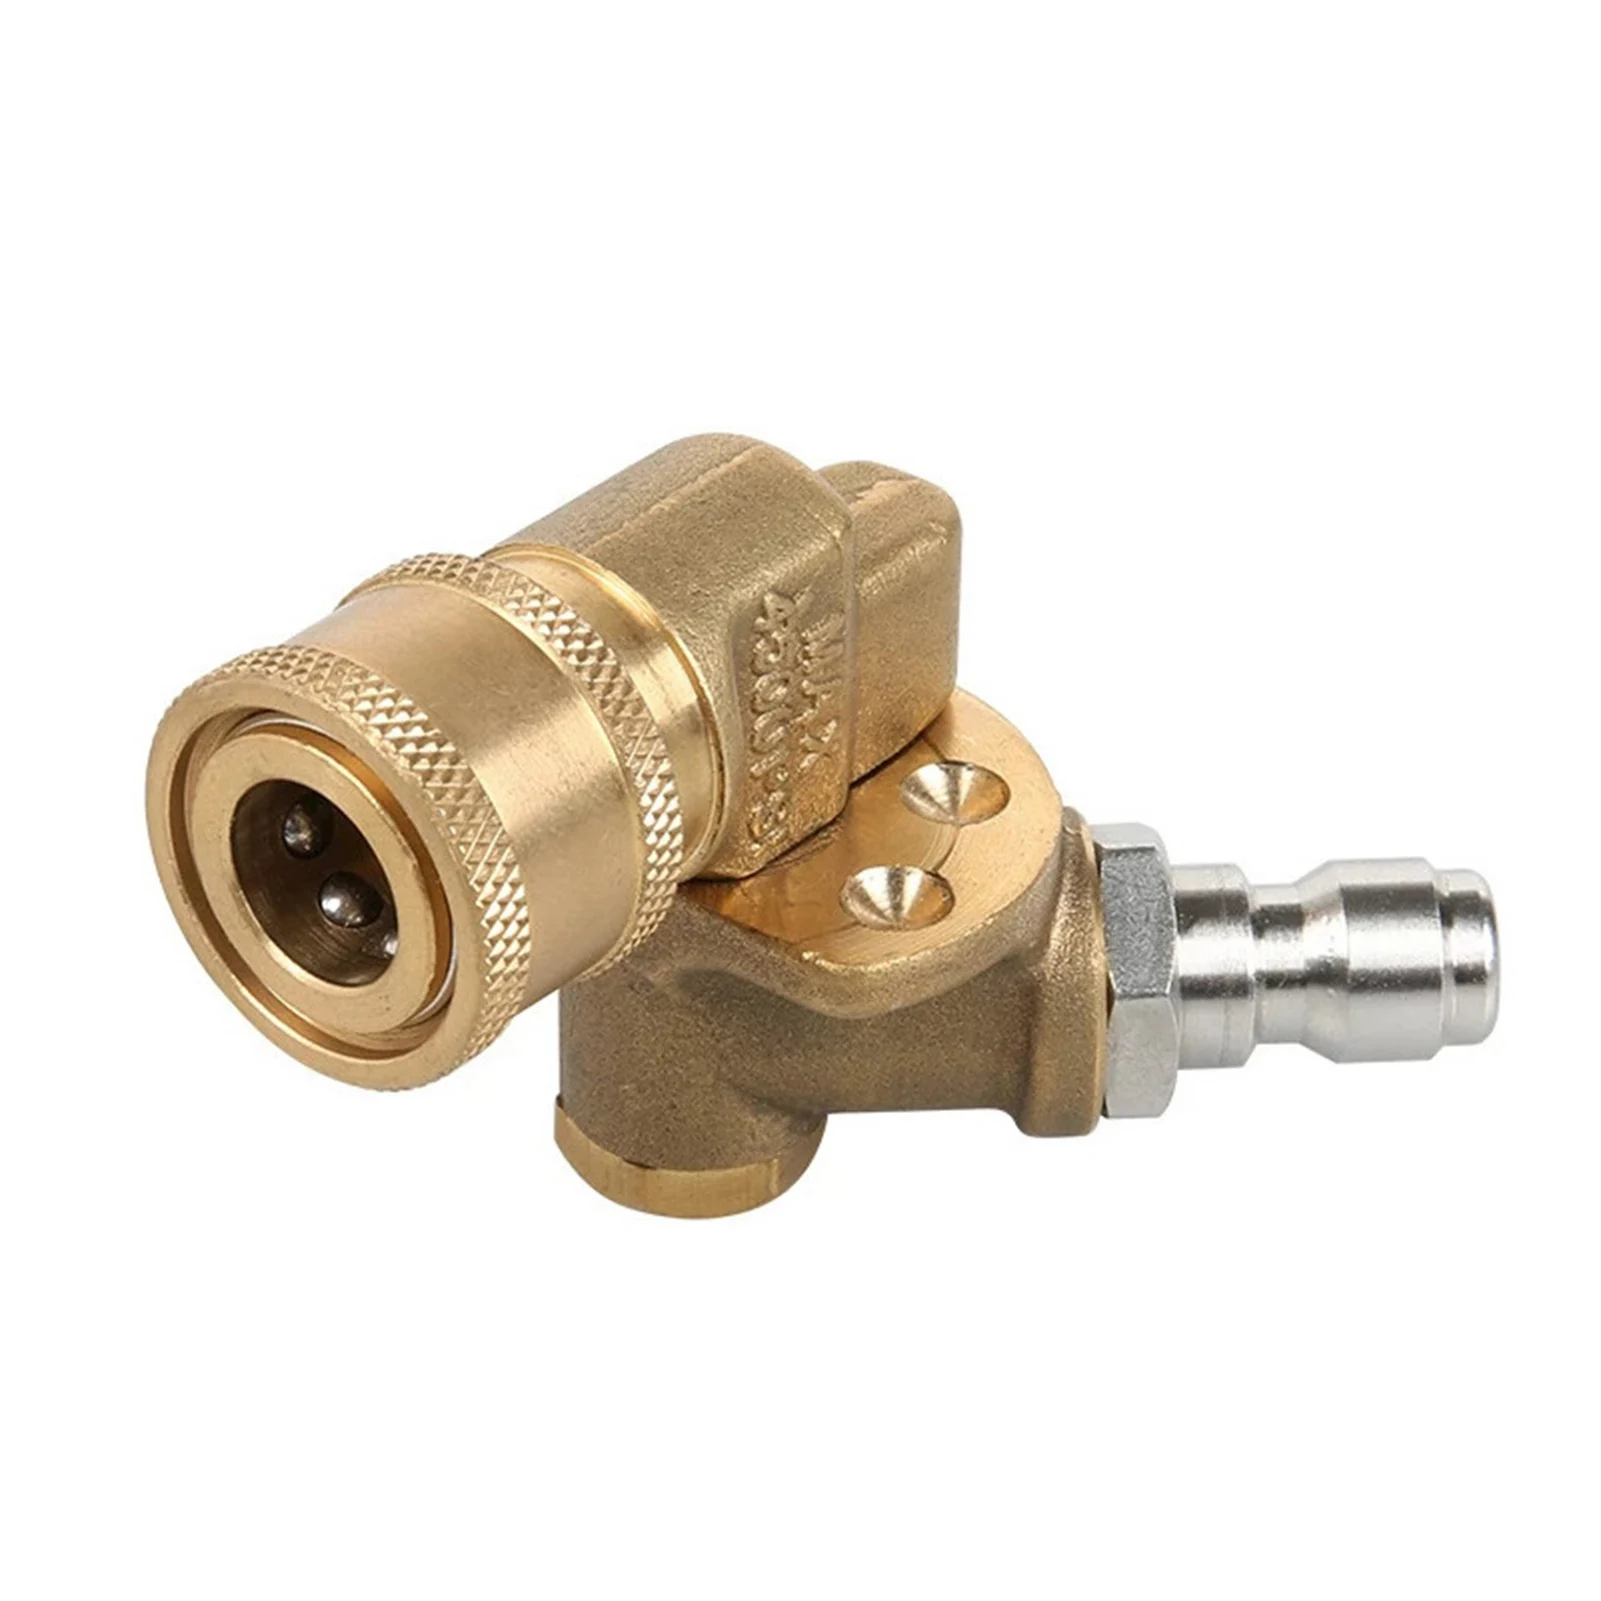 

5 Angles Pivoting Coupler 4500PSI Quick Connecting Brass Pressure Washer Cleaning Practical Dead Angle Spray Nozzle Adjustable